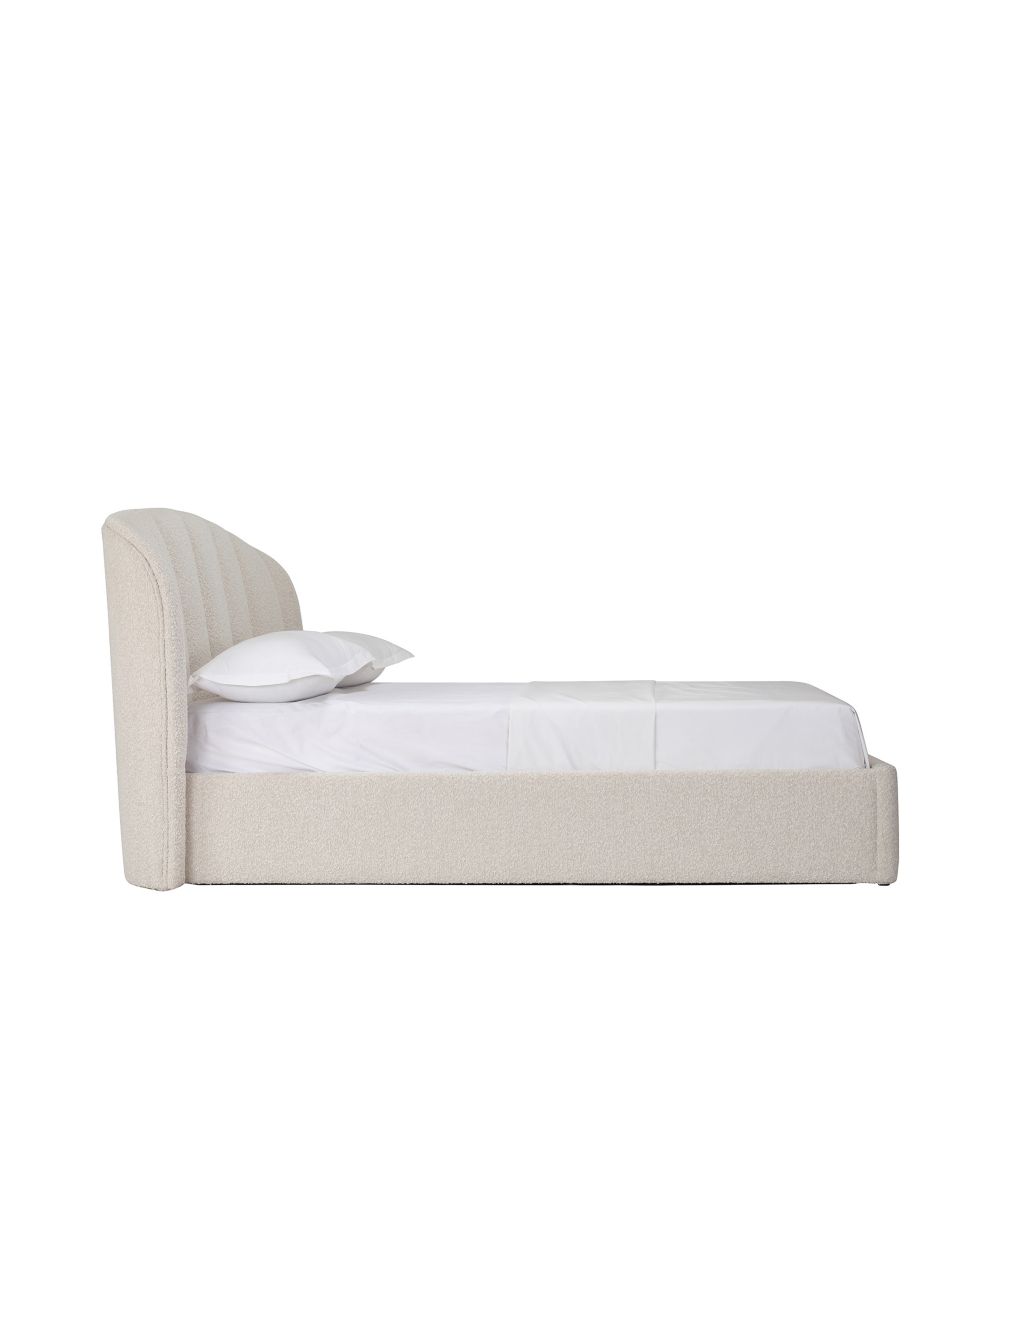 Cassis Upholstered Ottoman Bed 1 of 9